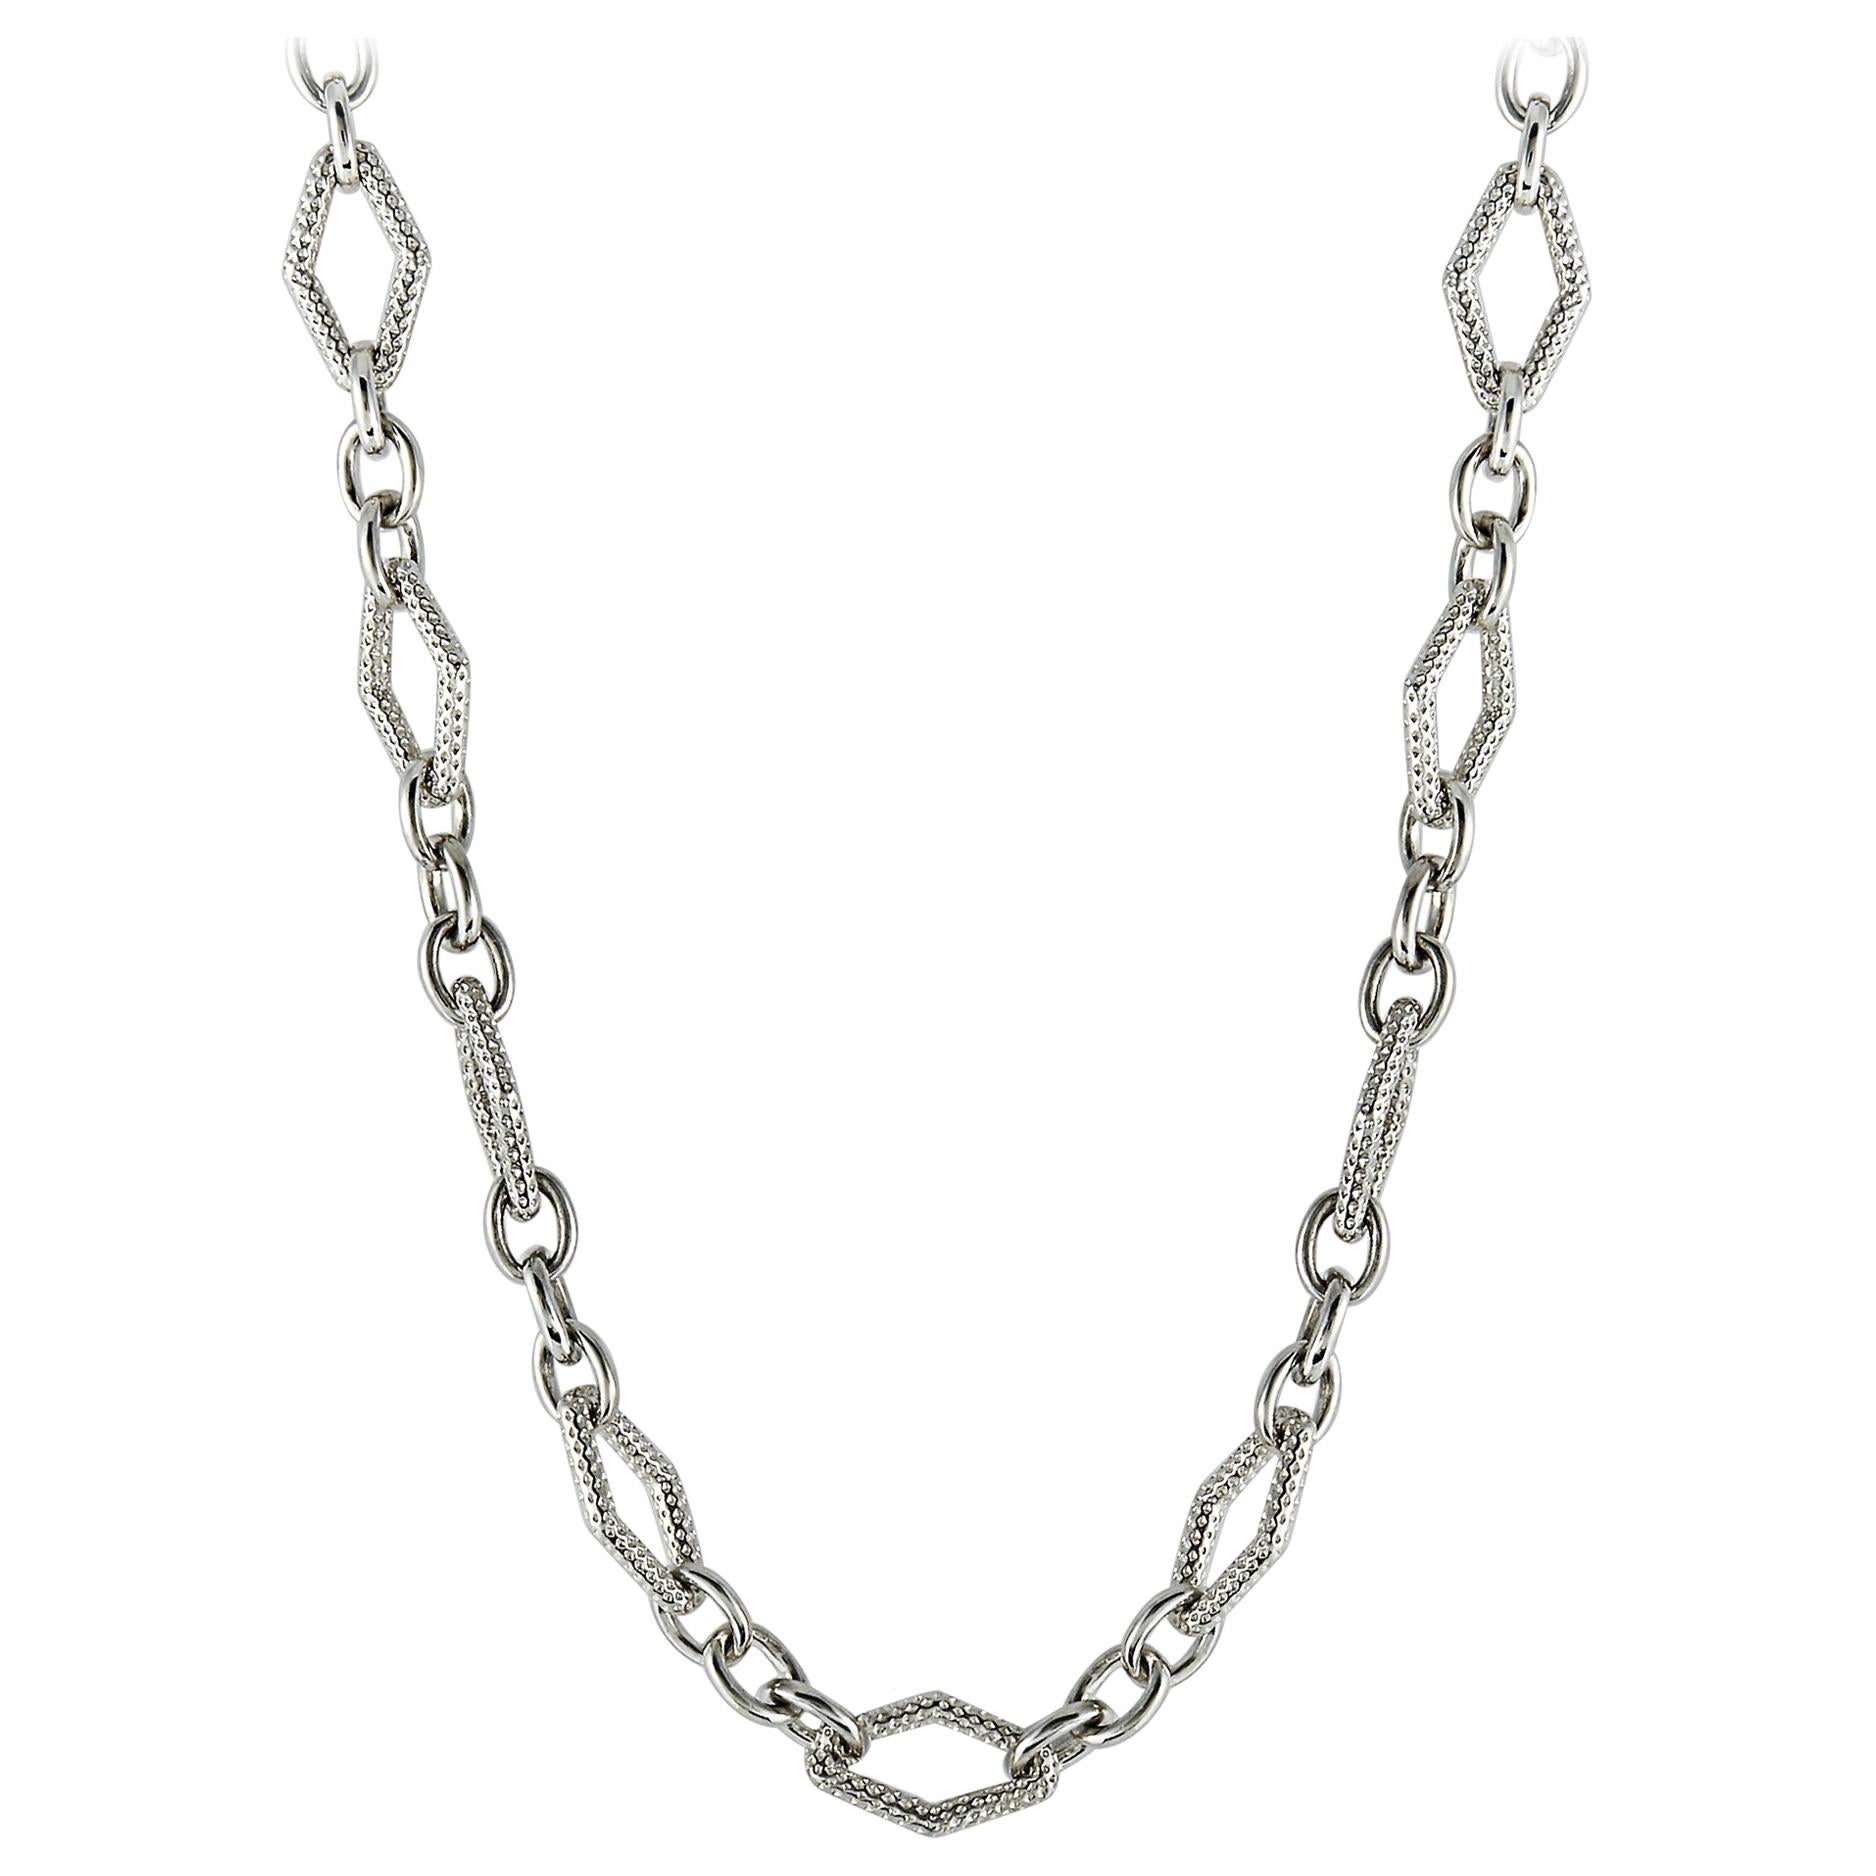 Charles Krypell White Gold and Silver Diamond Chain Necklace